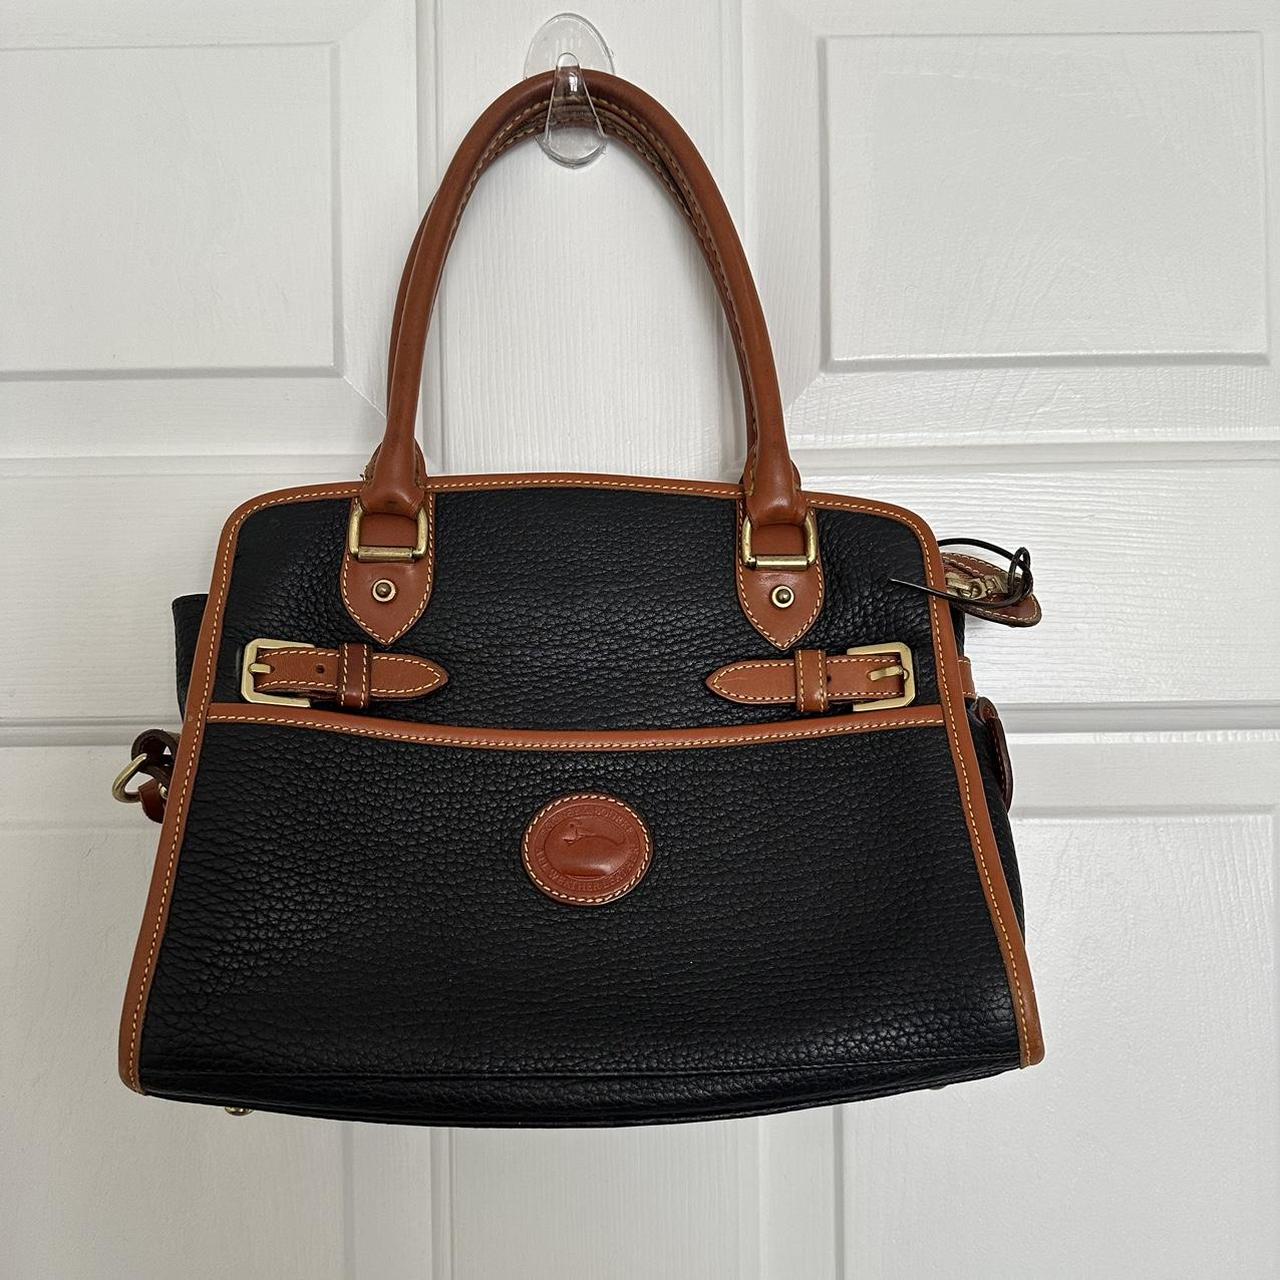 Vintage 80s Dooney and Bourke Black and Brown Pebbled Leather Purse